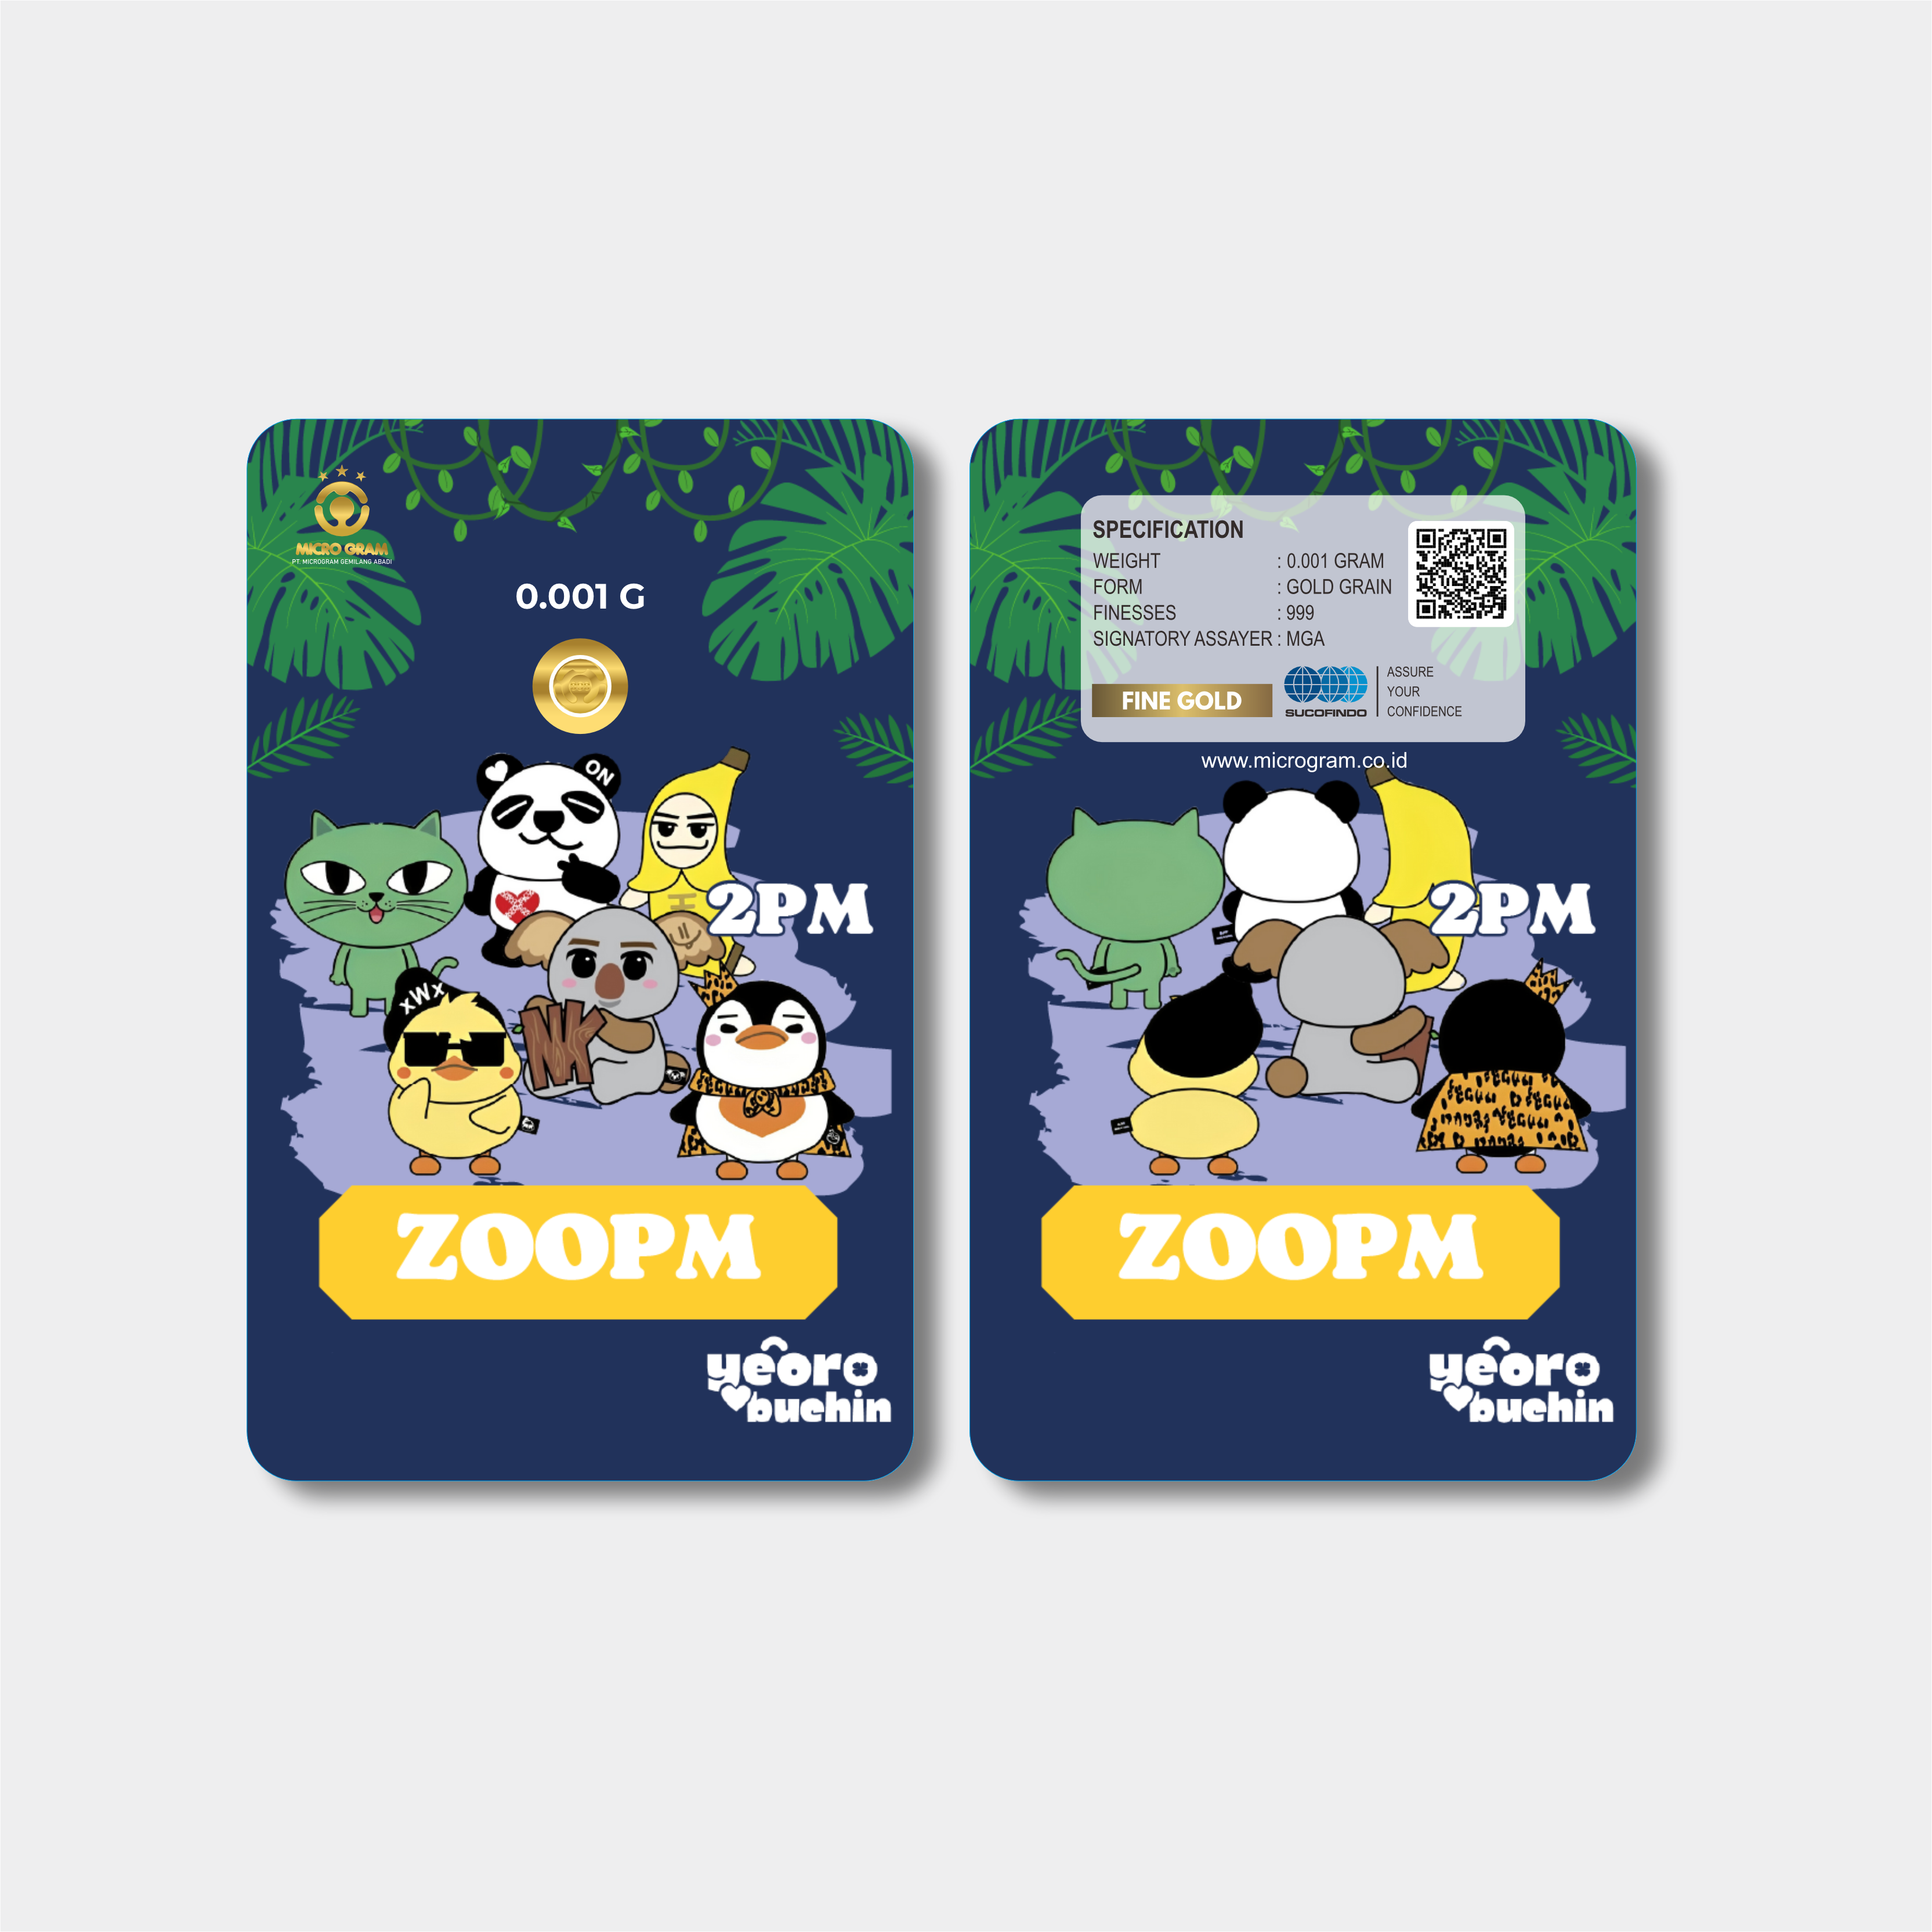 Zoopm 0.001